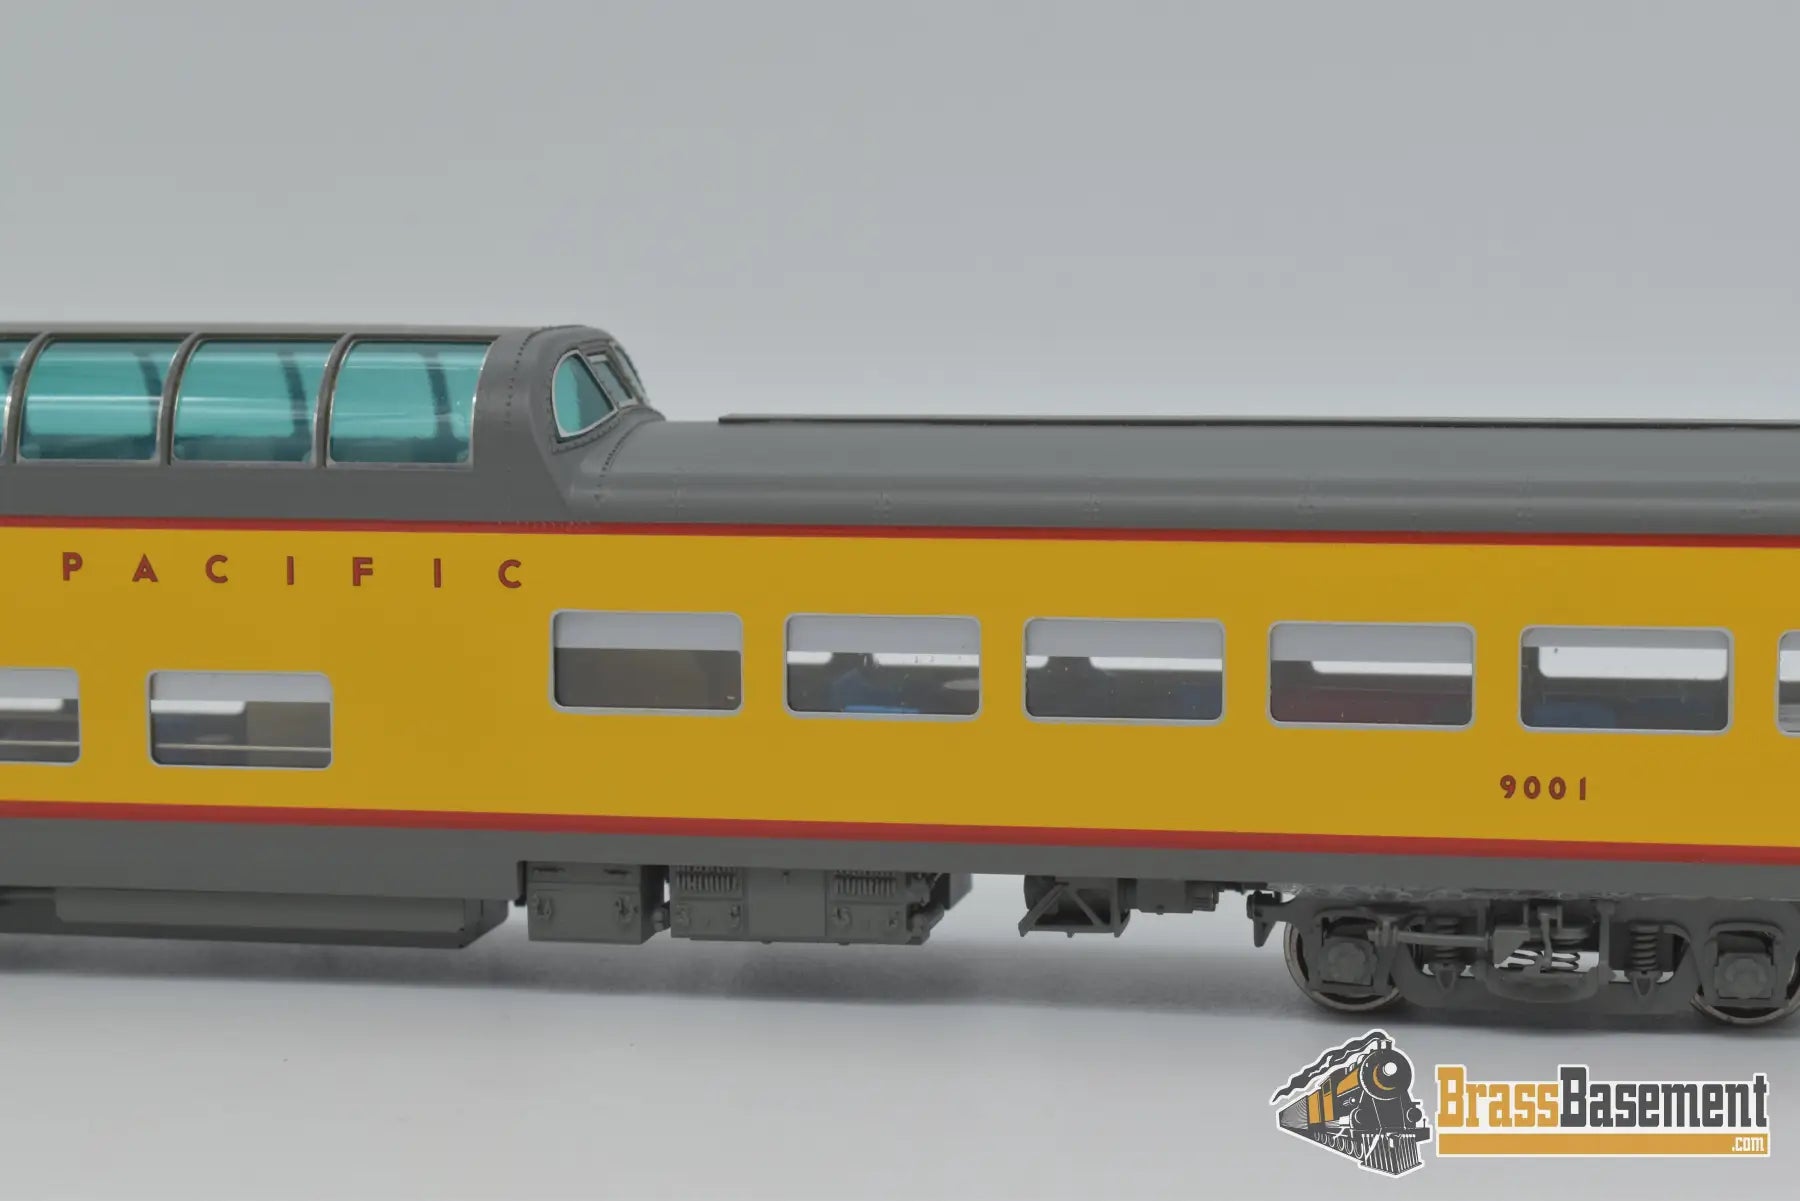 Ho Brass - Tcy 1382.10 Union Pacific Dome Observation Car #9001 - Factory Paint & Tail Light